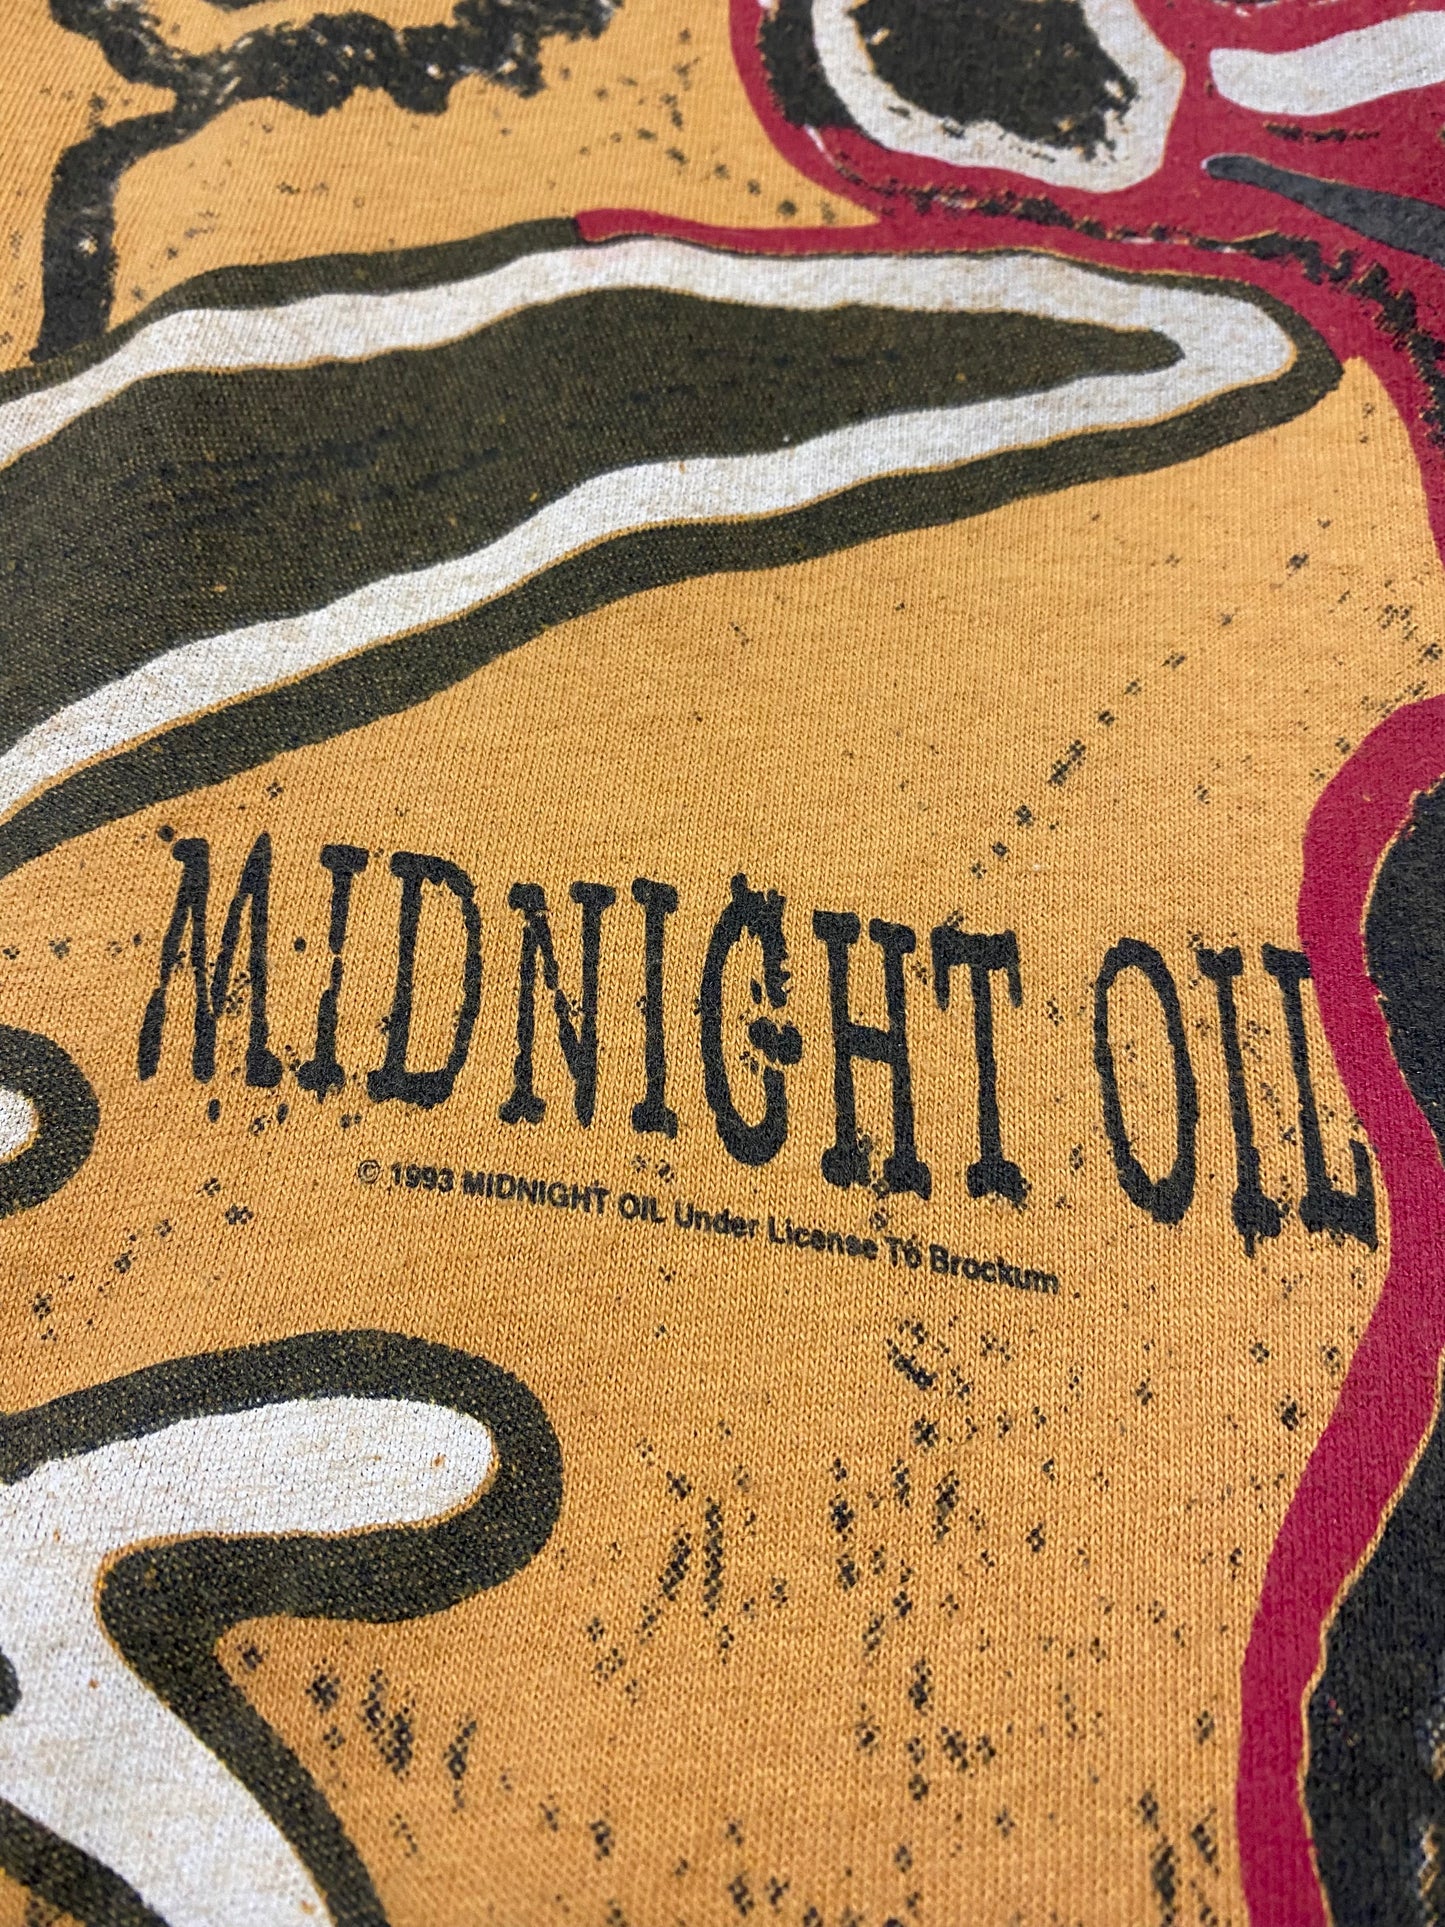 1993 Midnight Oil Earth and Sun and Moon Tour T-Shirt